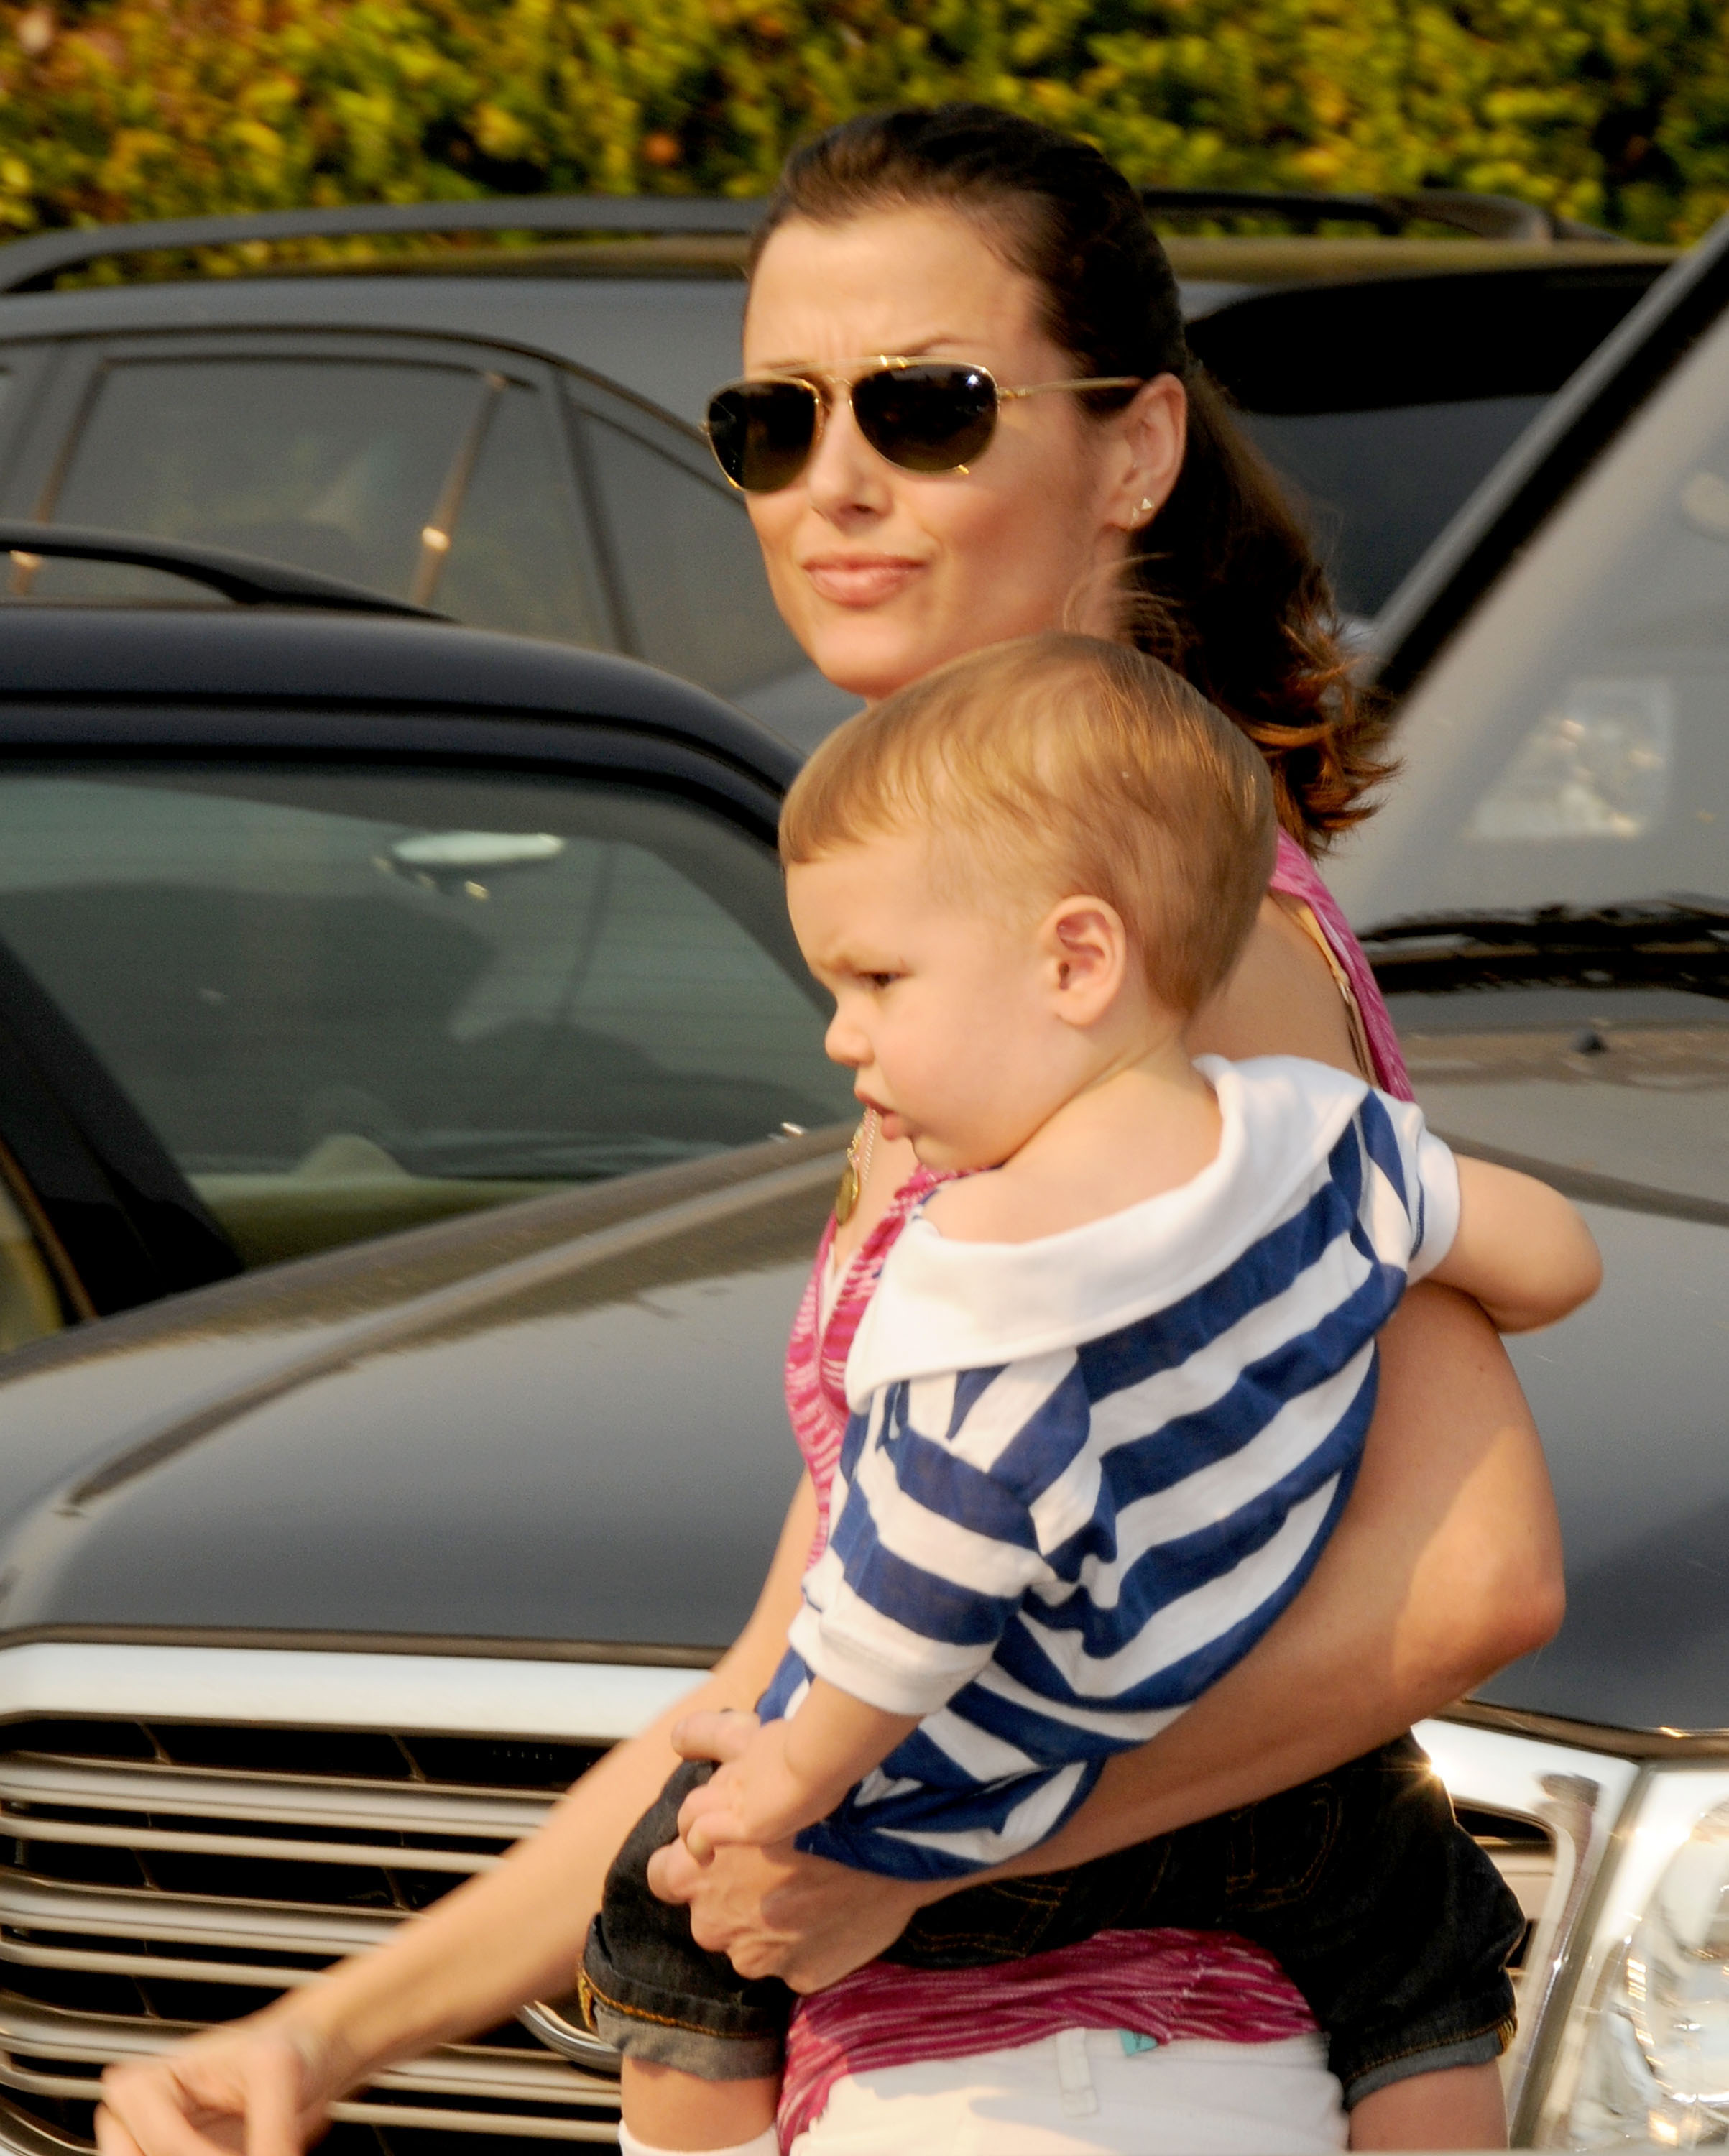 Bridget Moynahan with her son, John Edward Thomas Moynahan, at the 11th Anniversary Of P.S. Arts "Express Yourself 2008" on November 16, 2008 in Santa Monica, California | Source: Getty Images